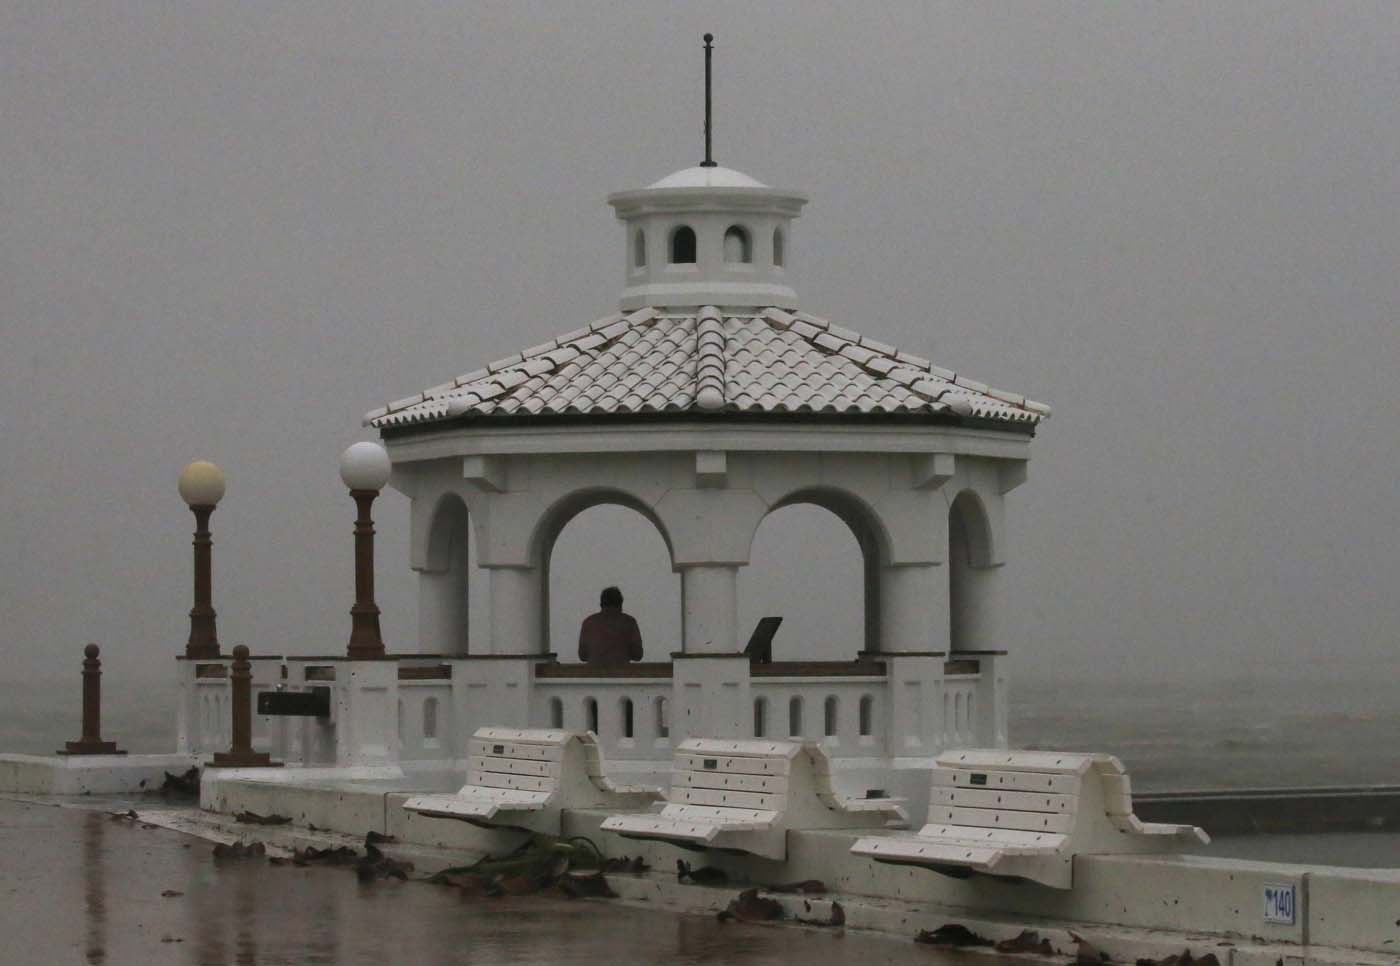 A man standing in a gazebo watches the surf of the approaching Hurricane Harvey on the boardwalk in Corpus Christi, Texas, U.S. August 25, 2017. REUTERS/Adrees Latif